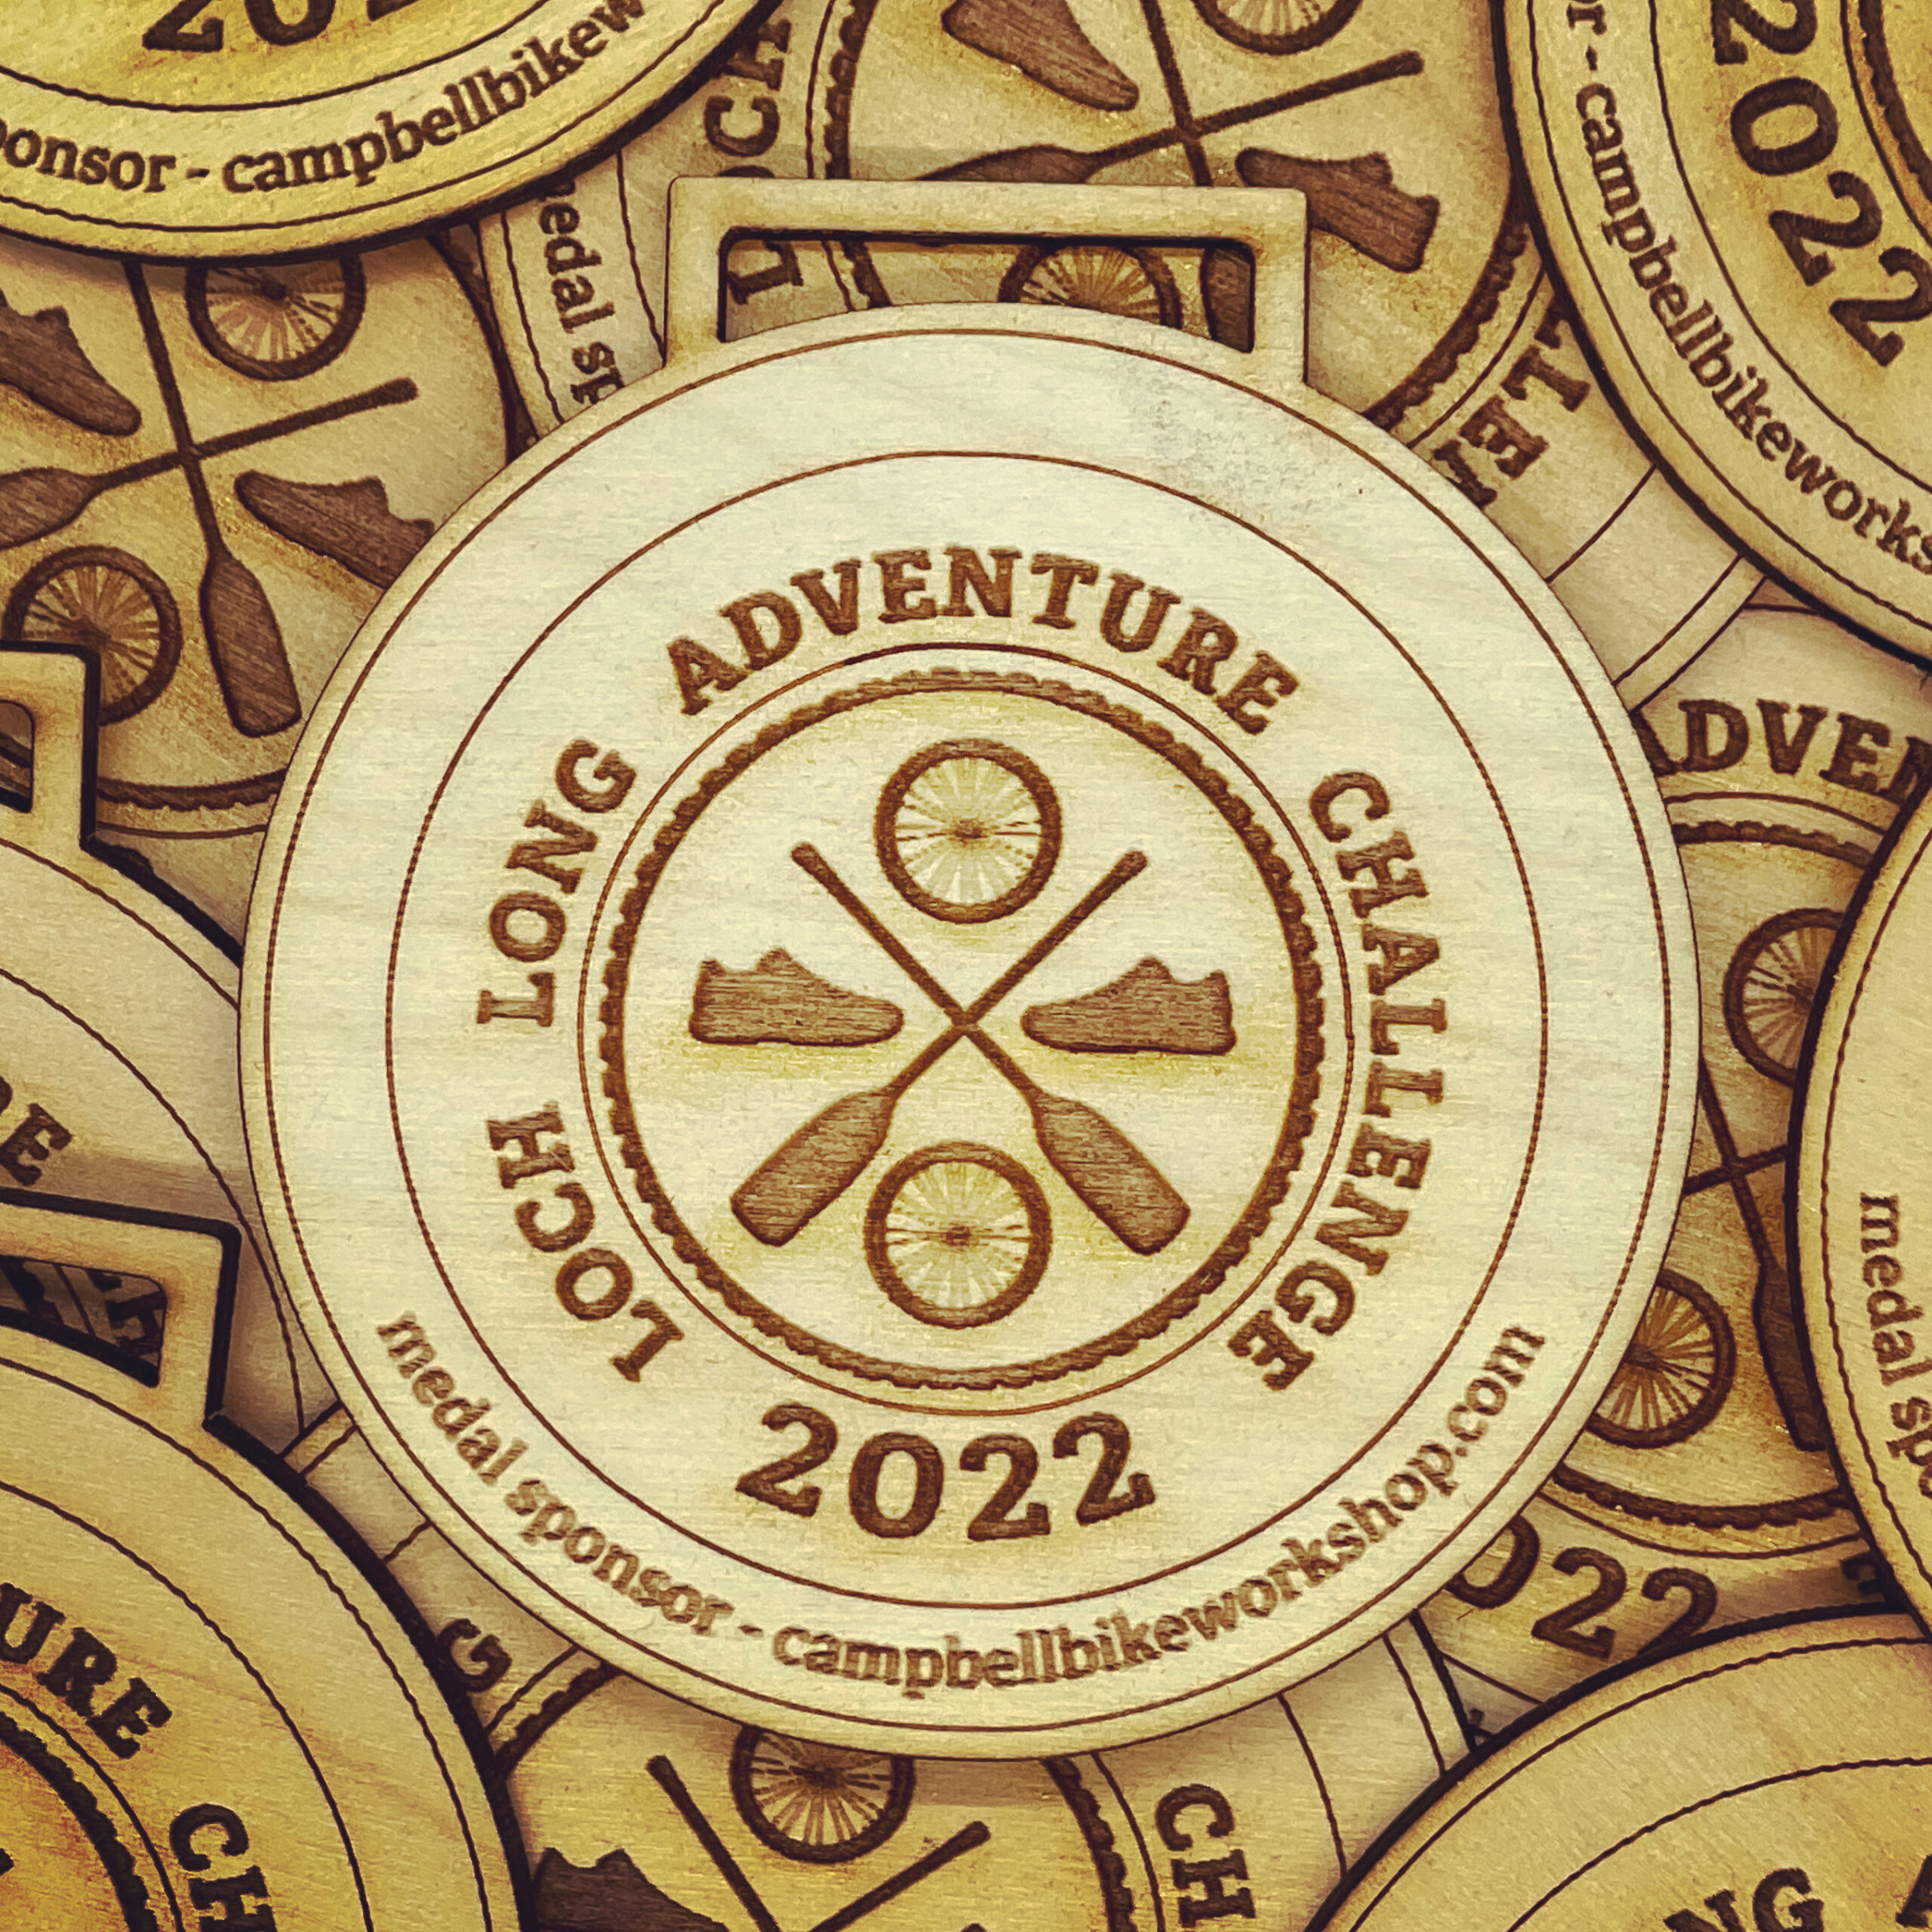 The medals designed by Ali Campbell for the Loch Long Adventure Challenge